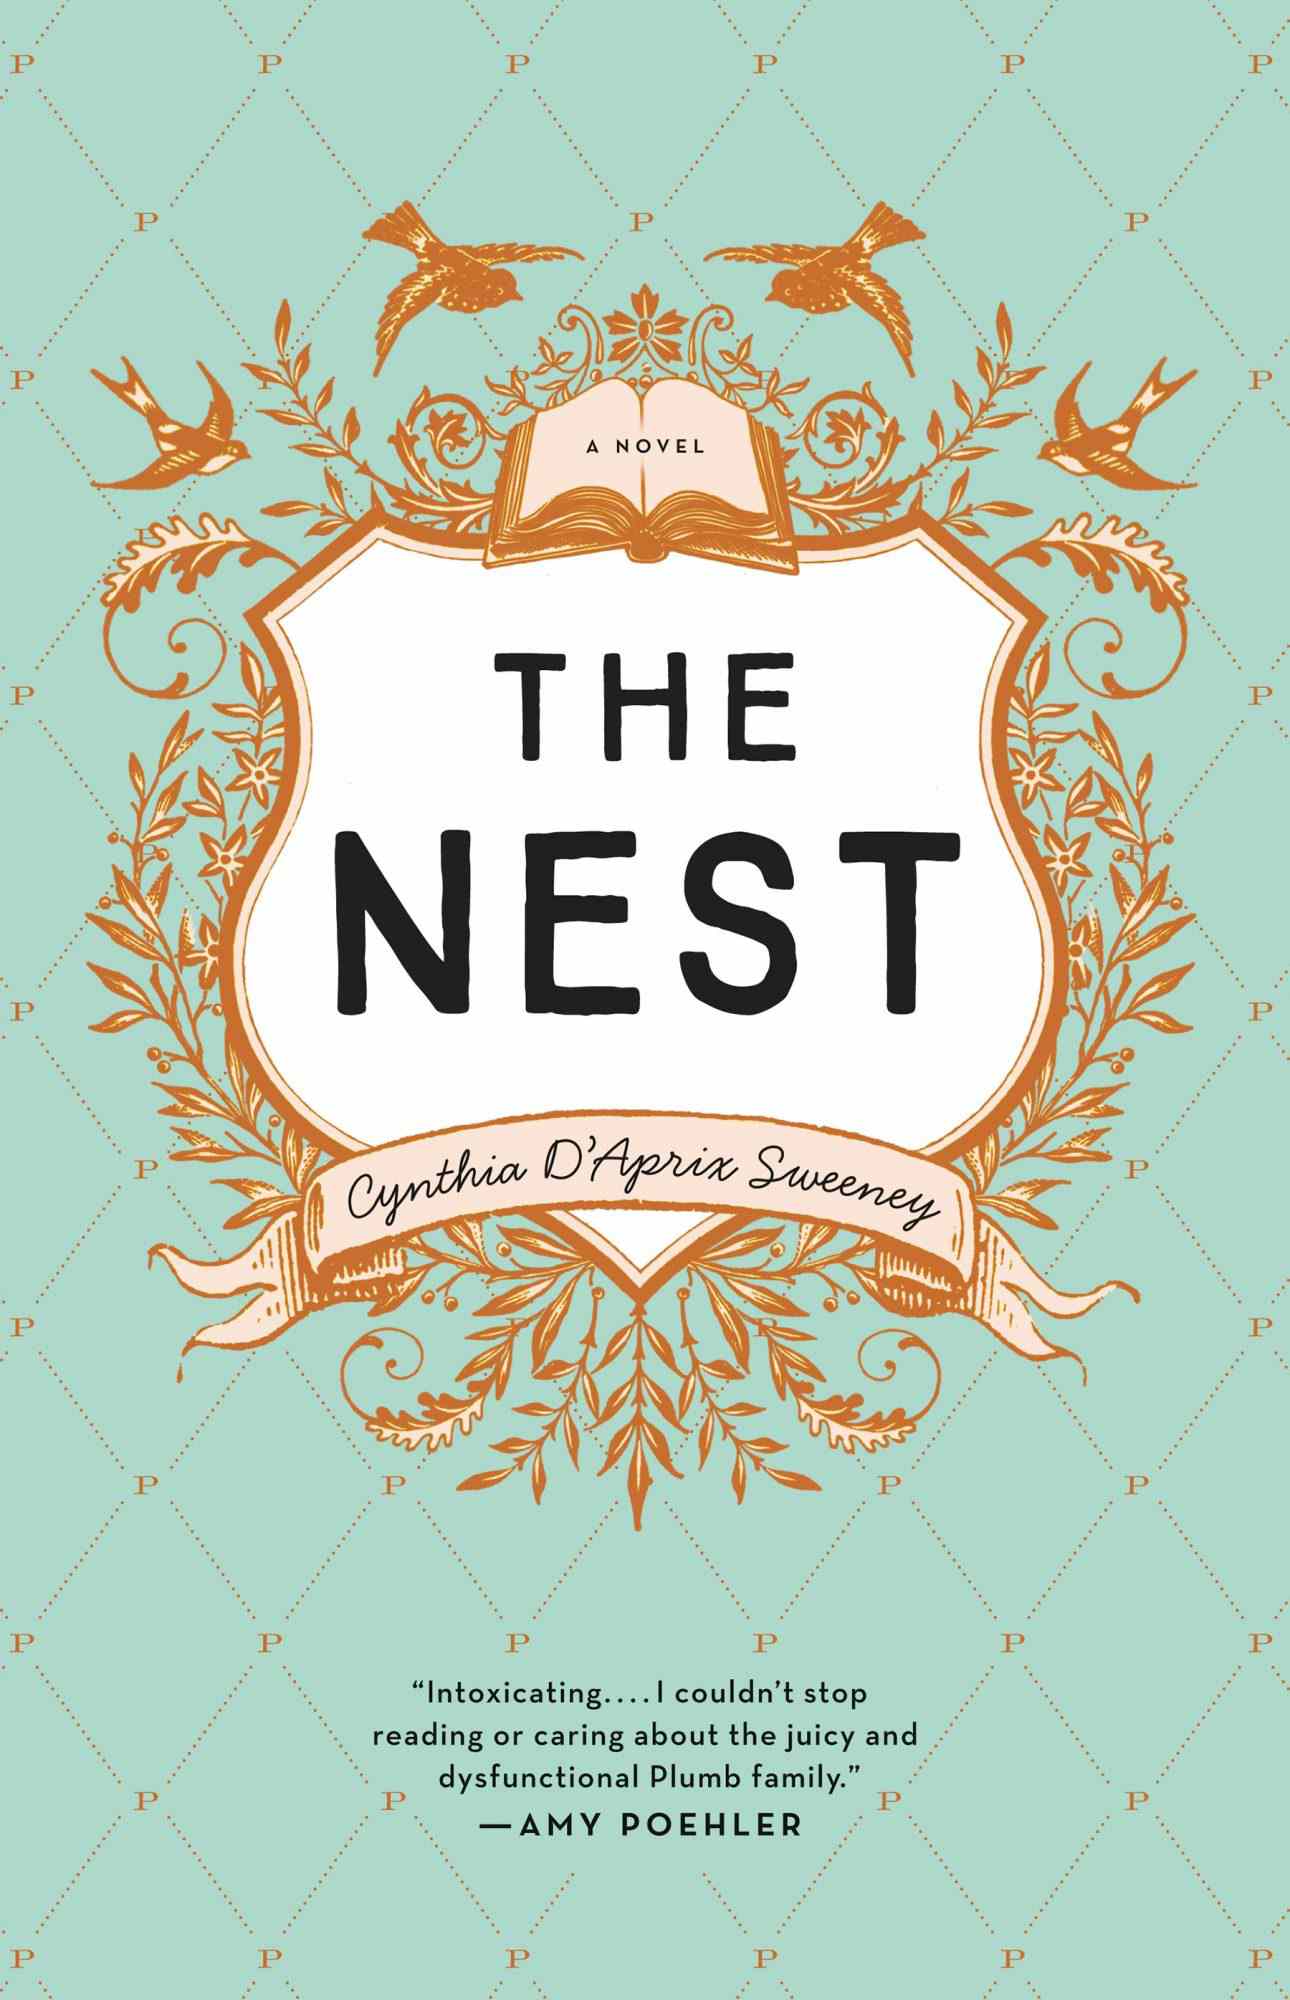 The Nest, by Cynthia D&rsquo;Aprix Sweeney